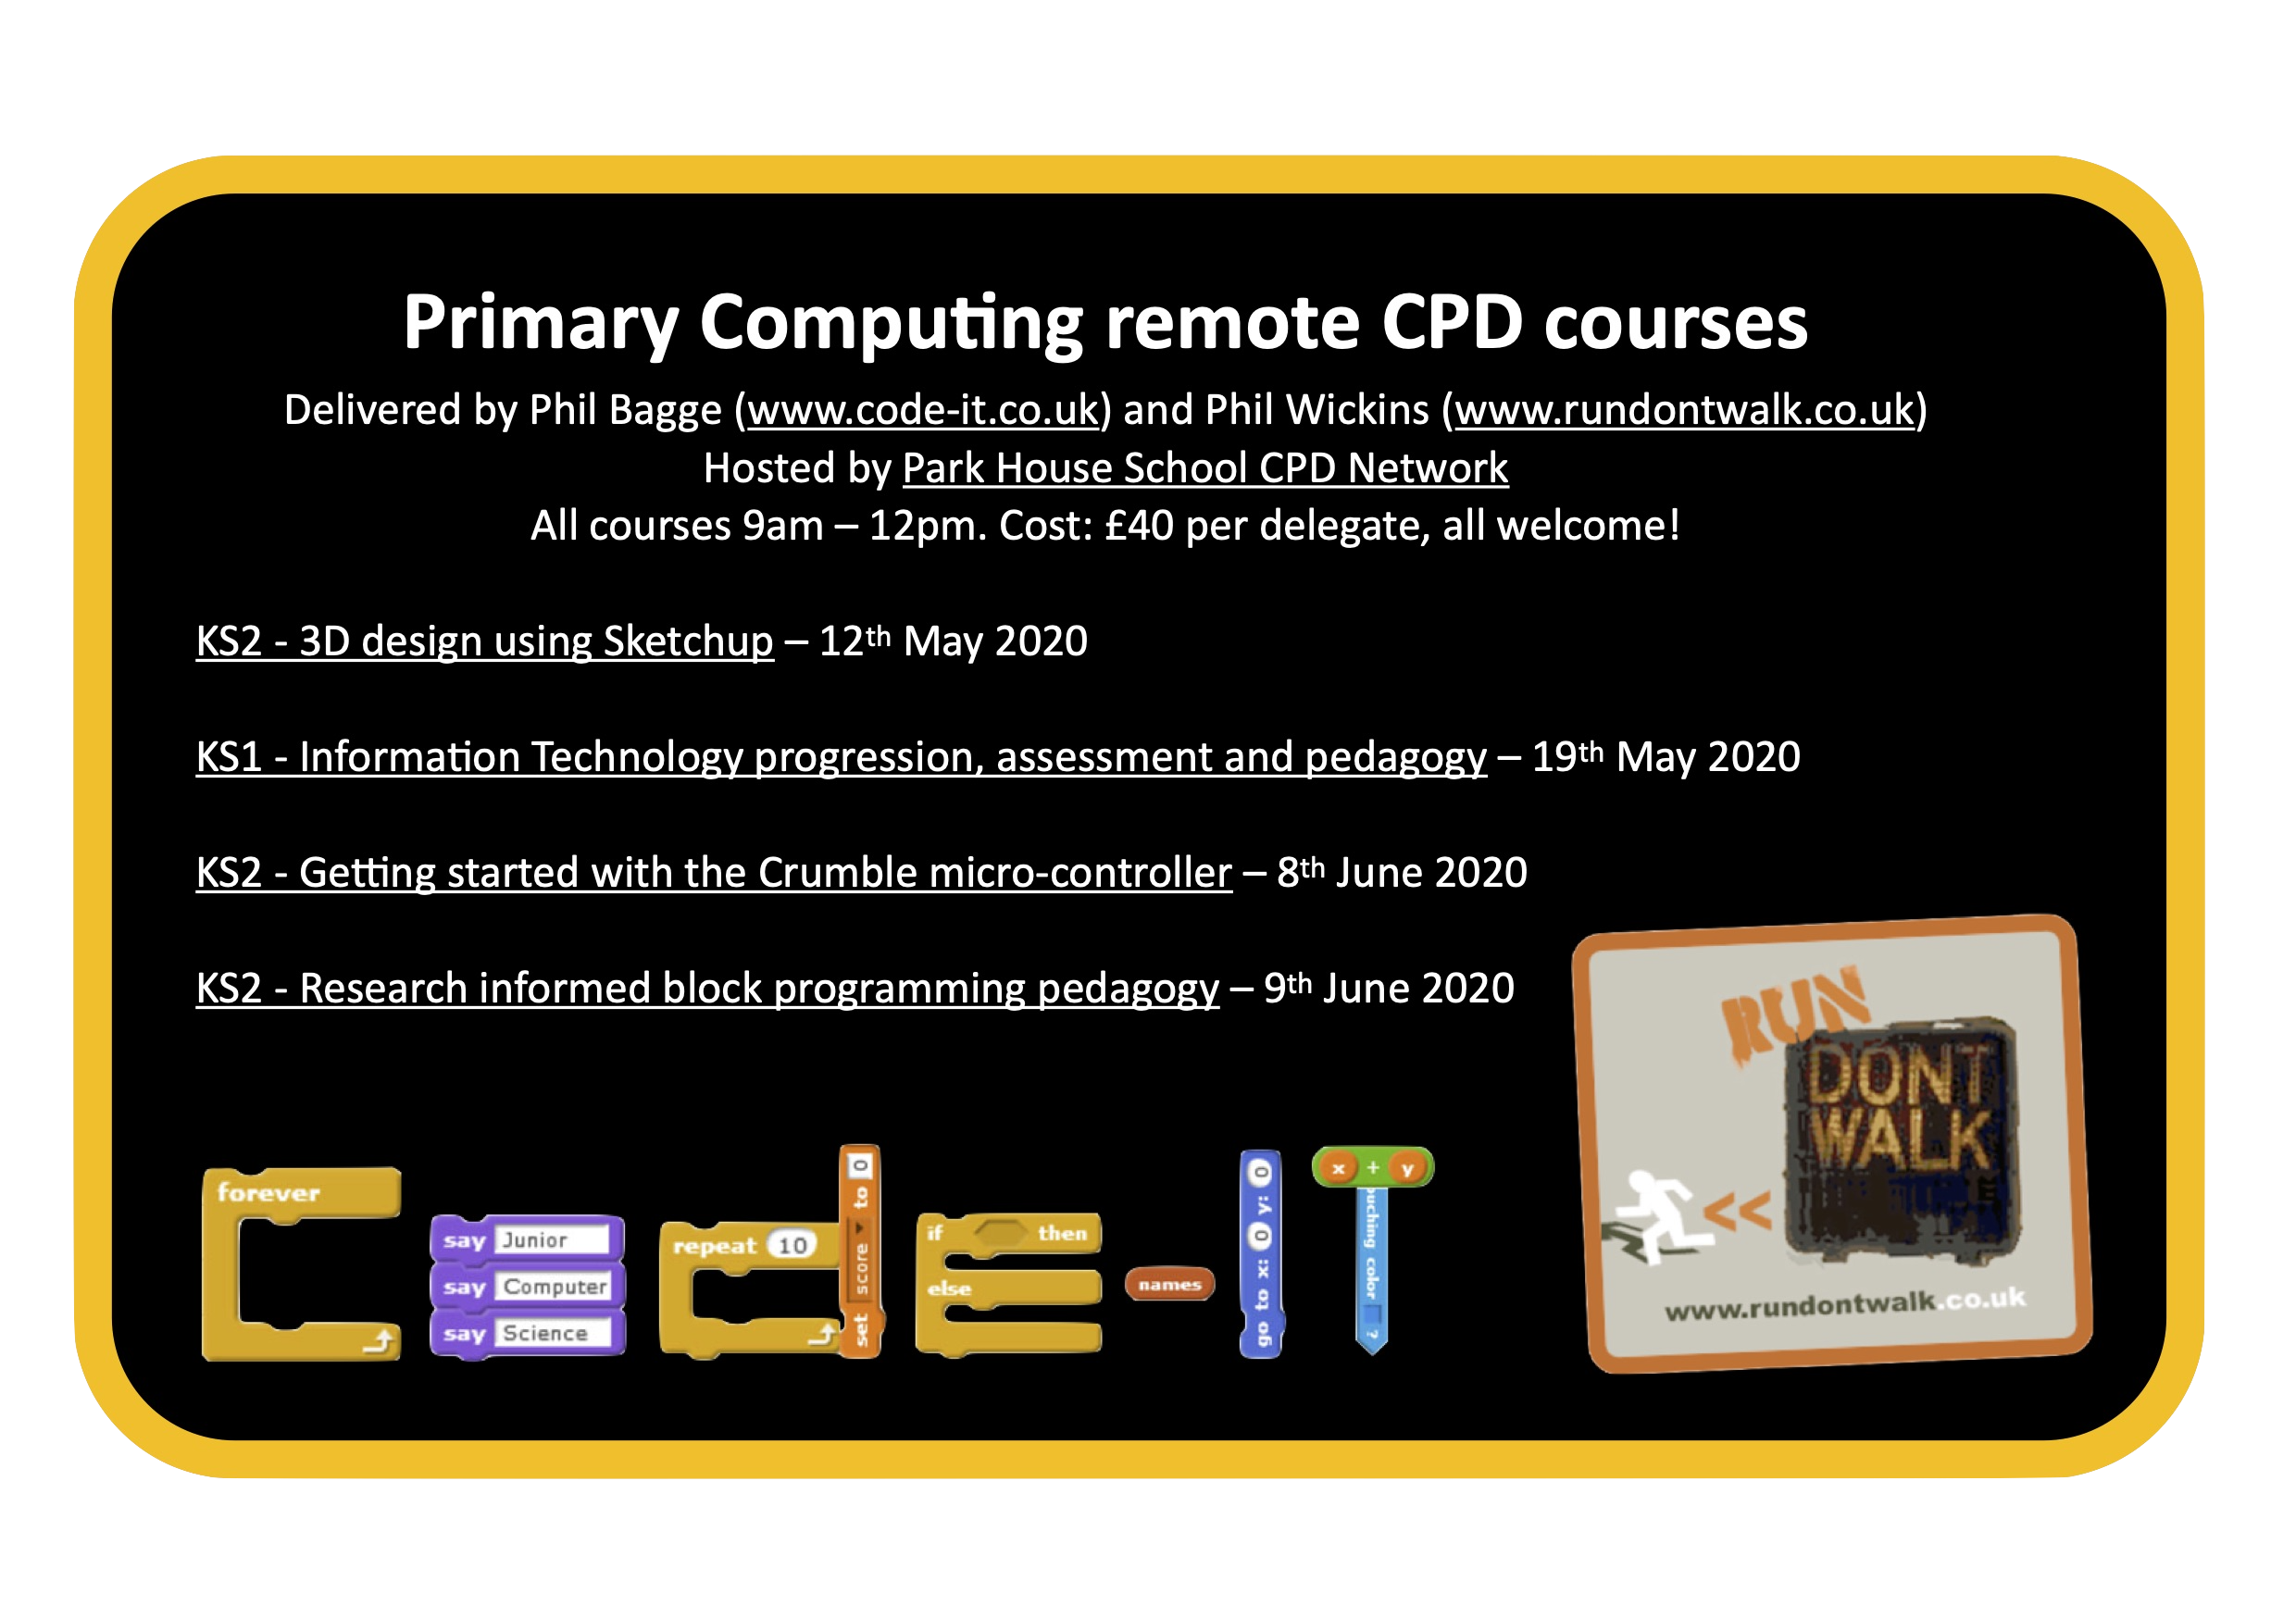 Primary Computing remote CPD courses